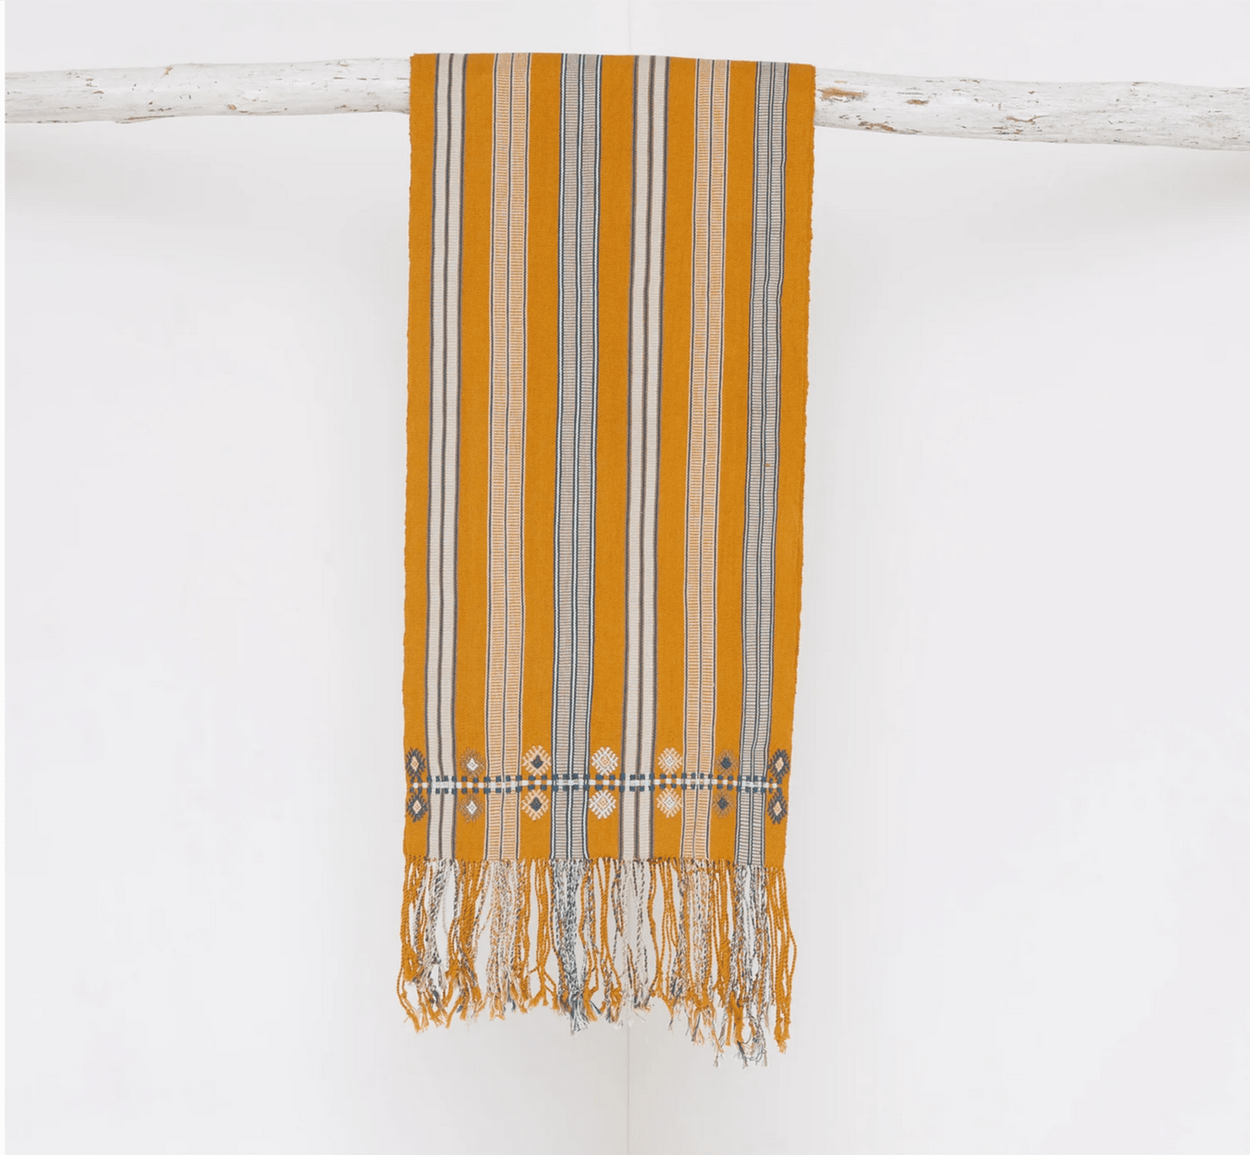 Ocaso Runner-Multiple Colors Table Linens Colorindio 11 x 72 inches without fringe 100% Cotton Gold with Tierra Stripes